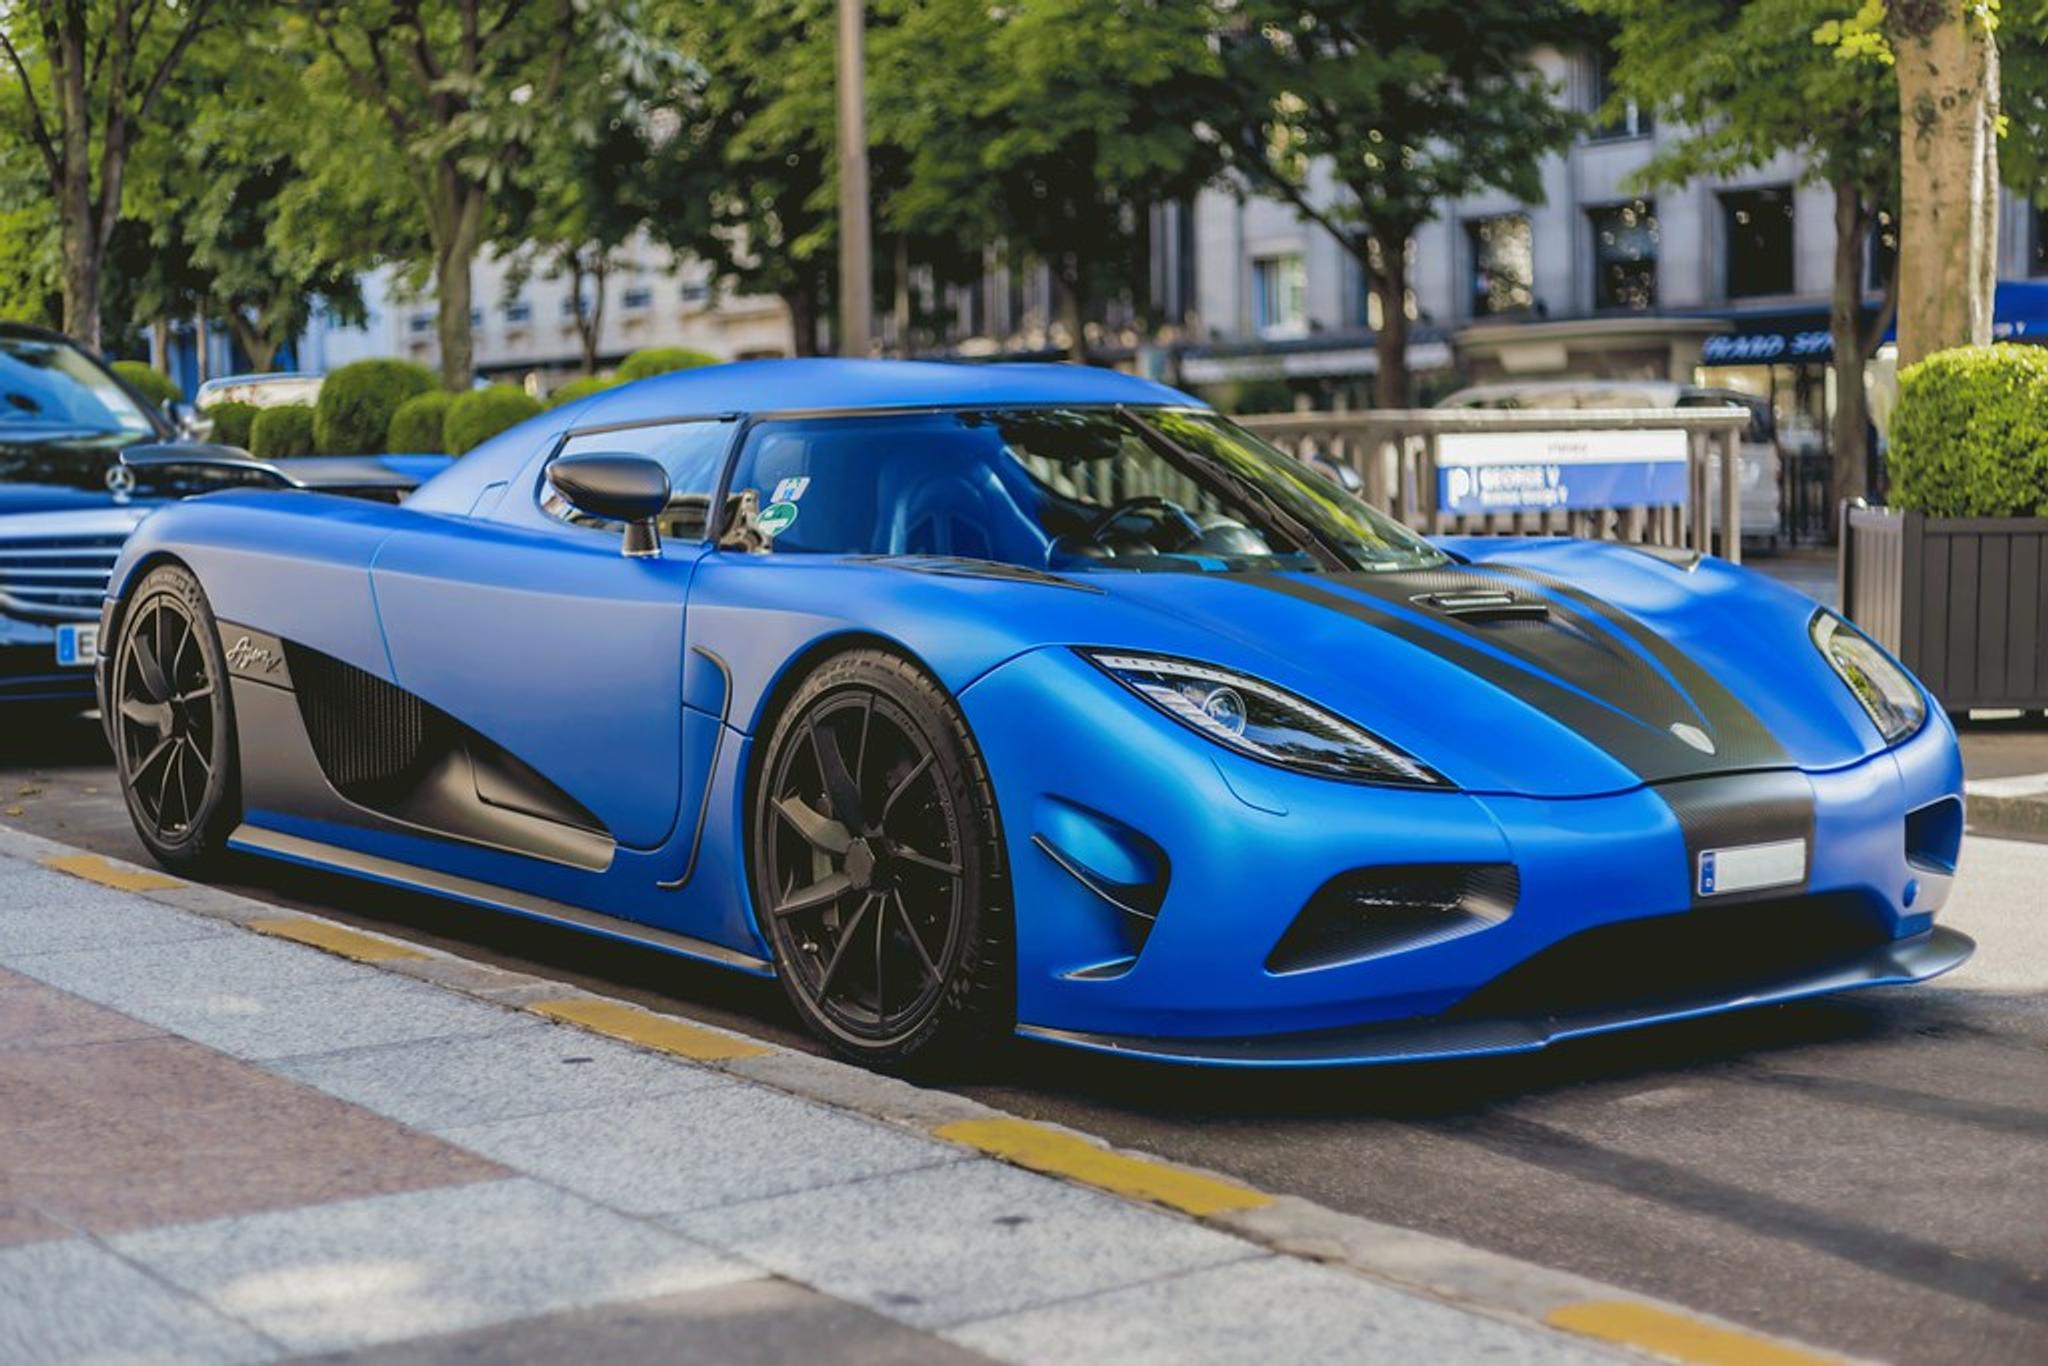 Blue Koenigsegg Agera R parked by the side of the road